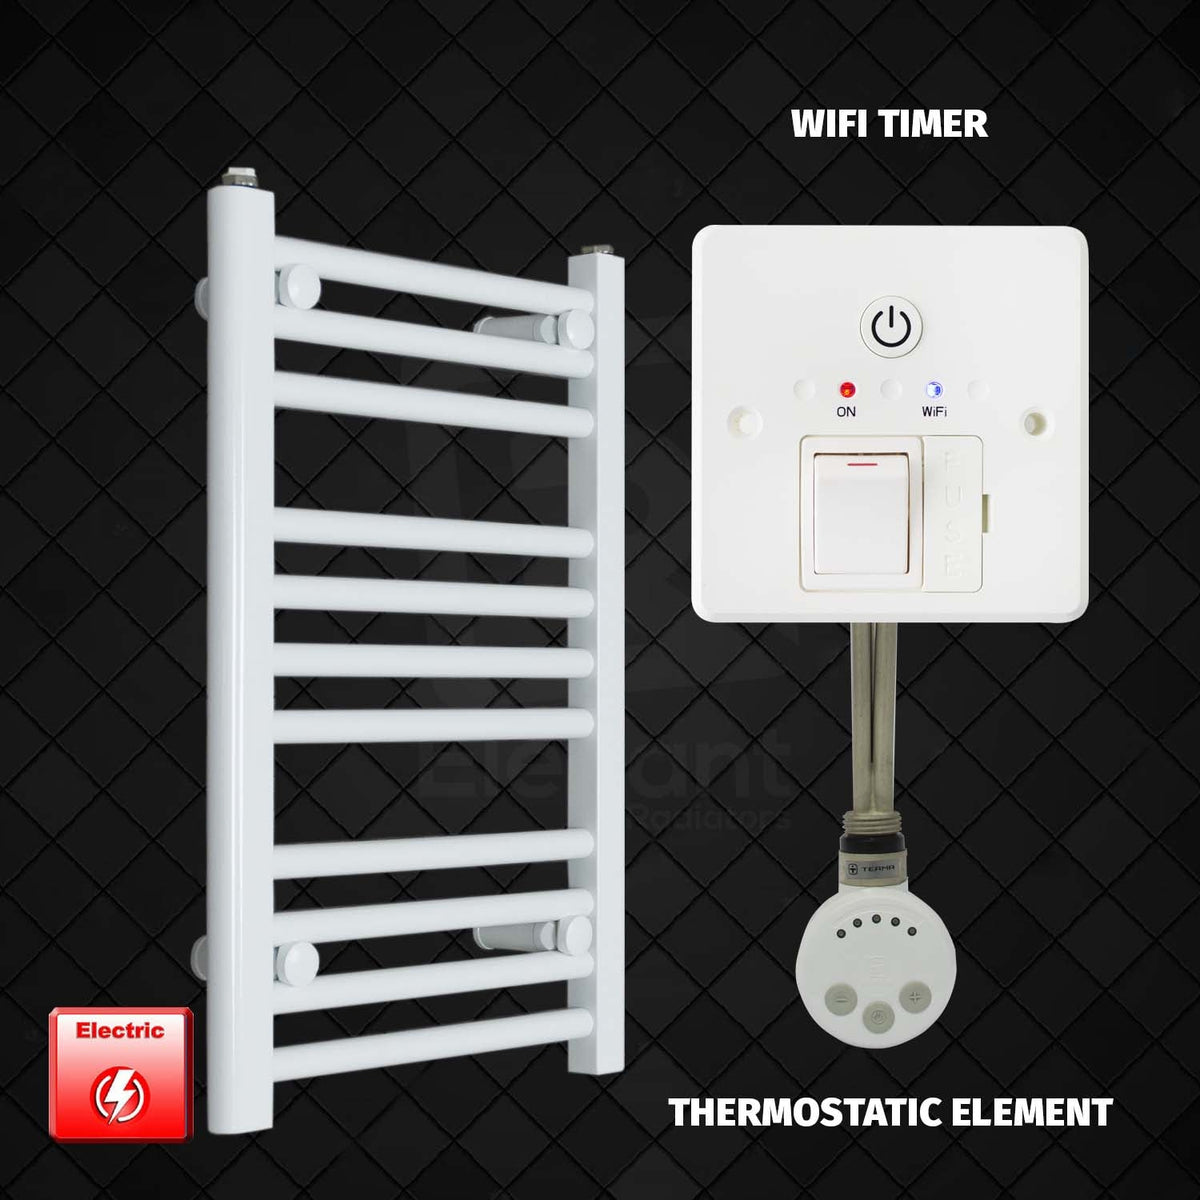 600 mm High 500 mm Wide Pre-Filled Electric Heated Towel Rail Radiator White HTR MOA Thermostatic element  wifi timer